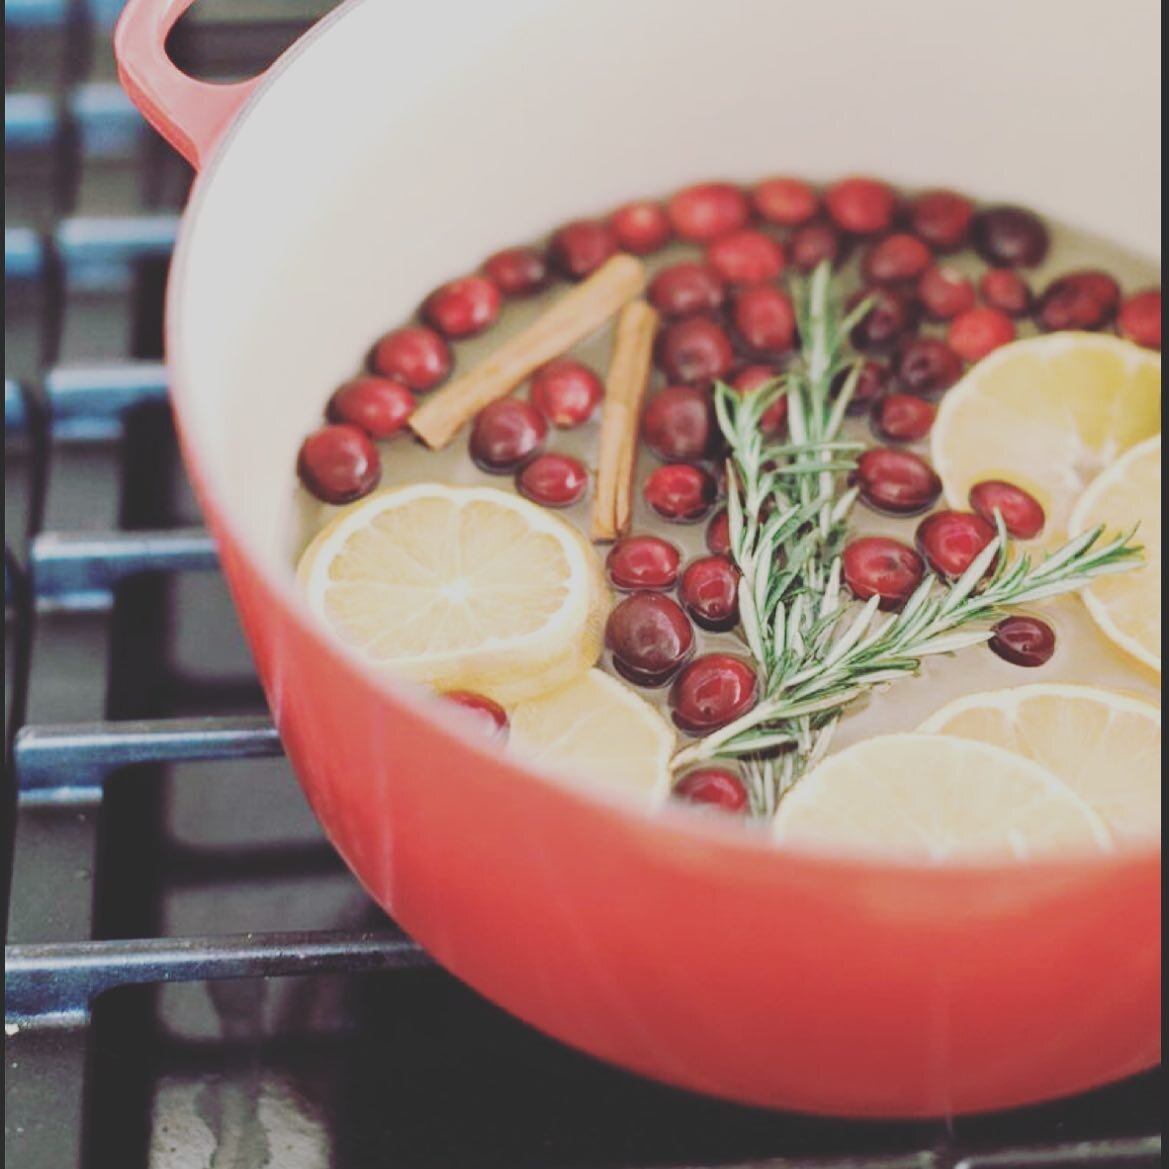 Autumn Simmer Pot 🍂🍁🍊

The seasons are turning and here in Texas we don&rsquo;t always have the lovely blanket of snow to accompany cooler temperatures.  Thankfully there&rsquo;s ways to bring the outdoors inside. A colorful simmer pot lends cheer